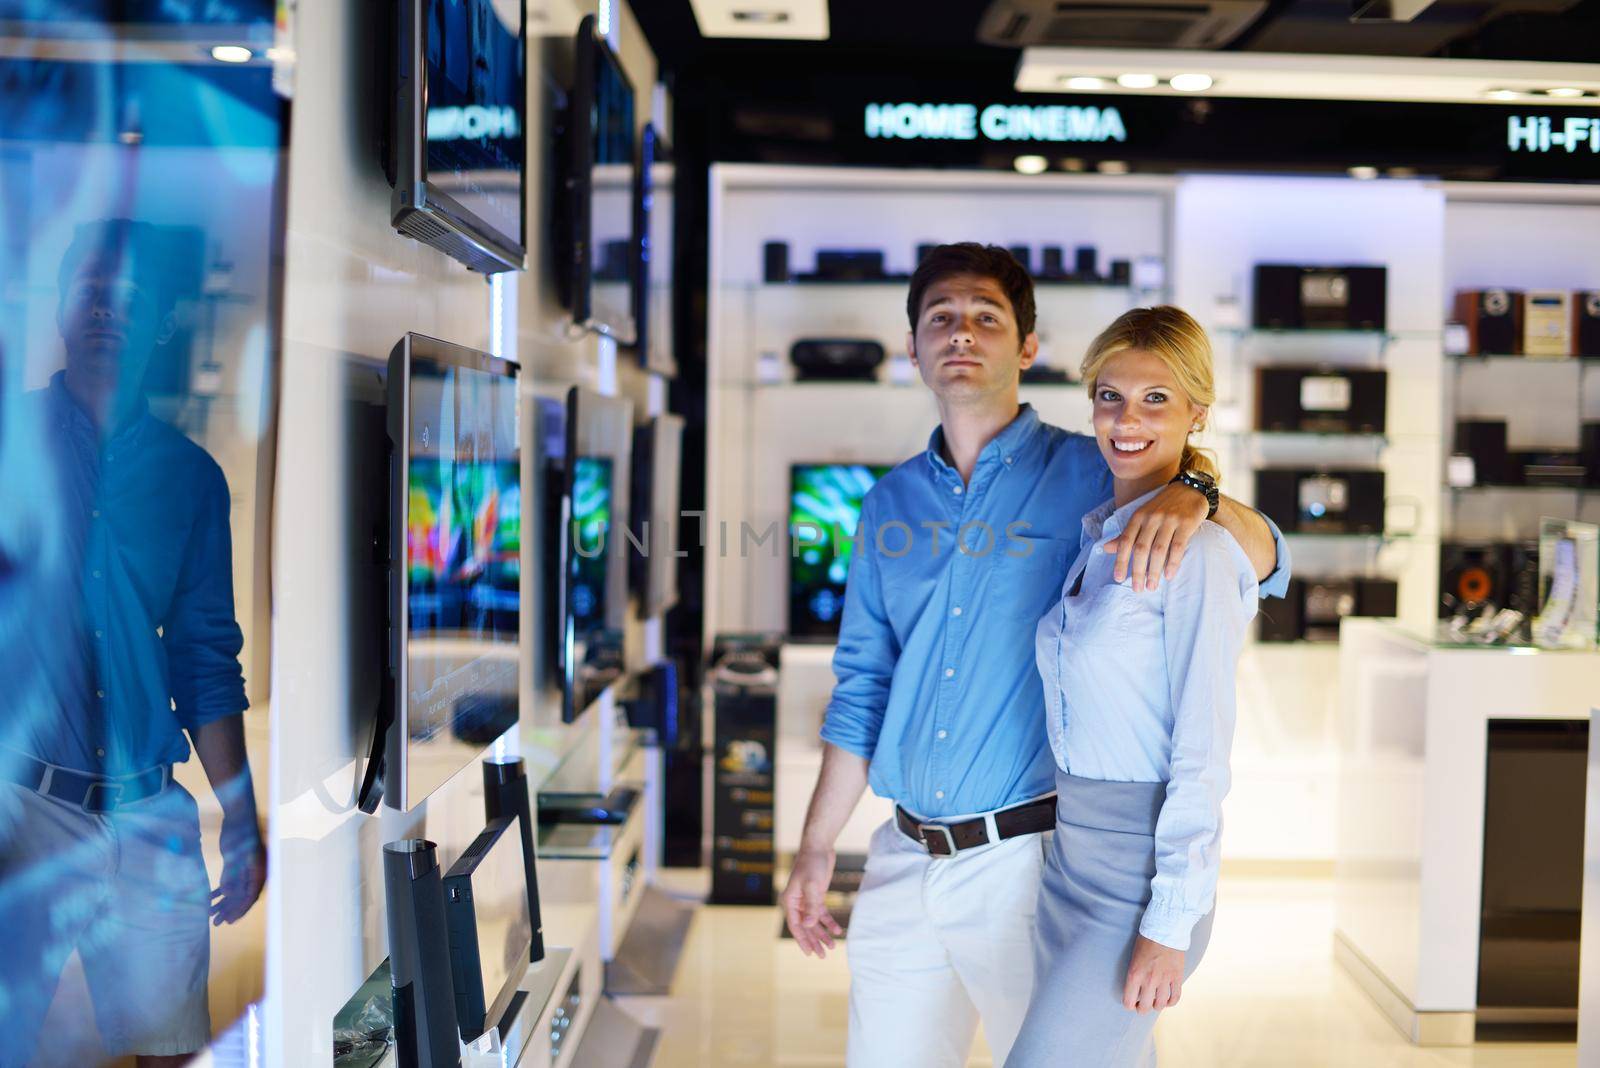 Young couple in consumer electronics store looking at latest laptop, television and photo camera